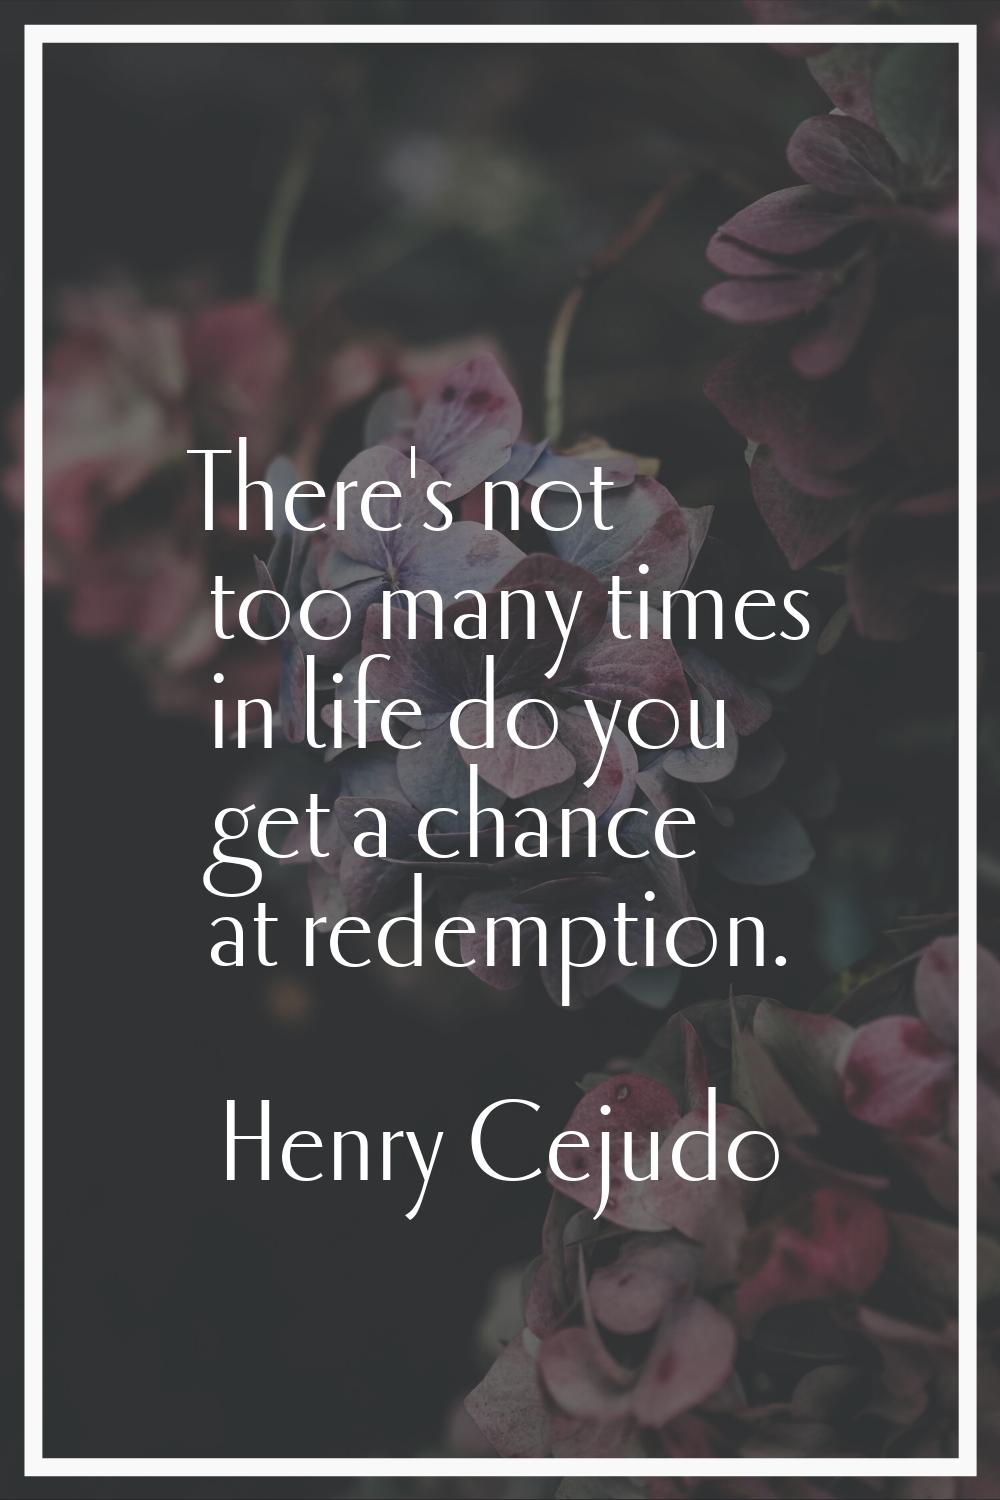 There's not too many times in life do you get a chance at redemption.